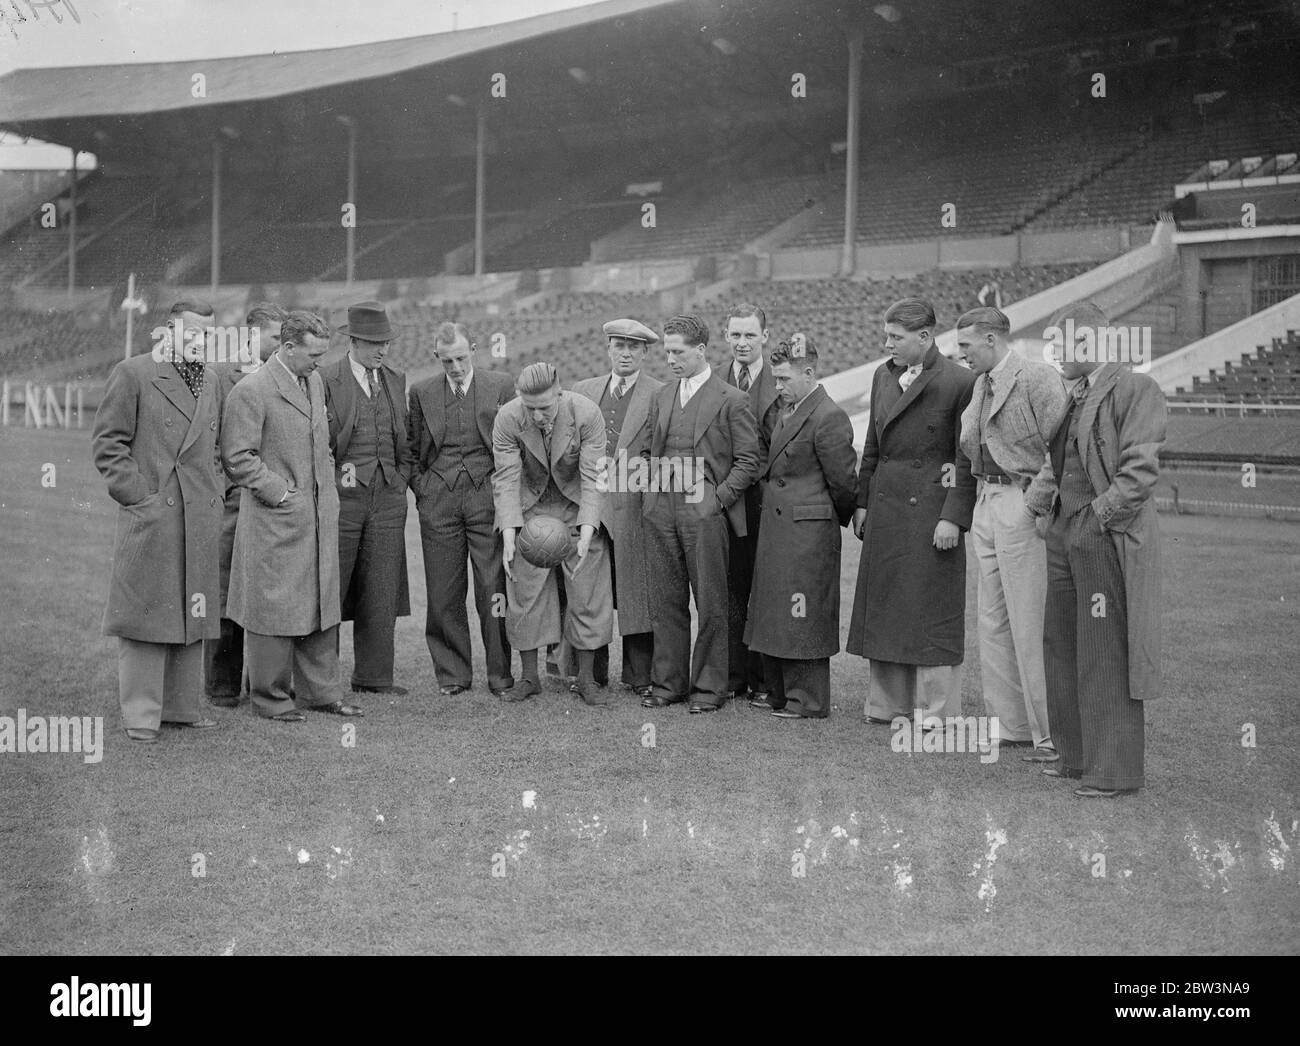 Sheffield United inspect cup final pitch at Wembley . The Sheffield United team which is to meet Arsenal in the FA Cup Final tomorrow ( Saturday ) inspected the pitch at Wembley Stadium . Photo shows , Harry Hooper , the Sheffield United captain , bouncing a ball to test the ground , watched by the rest of the team . 24 April 1936 Stock Photo